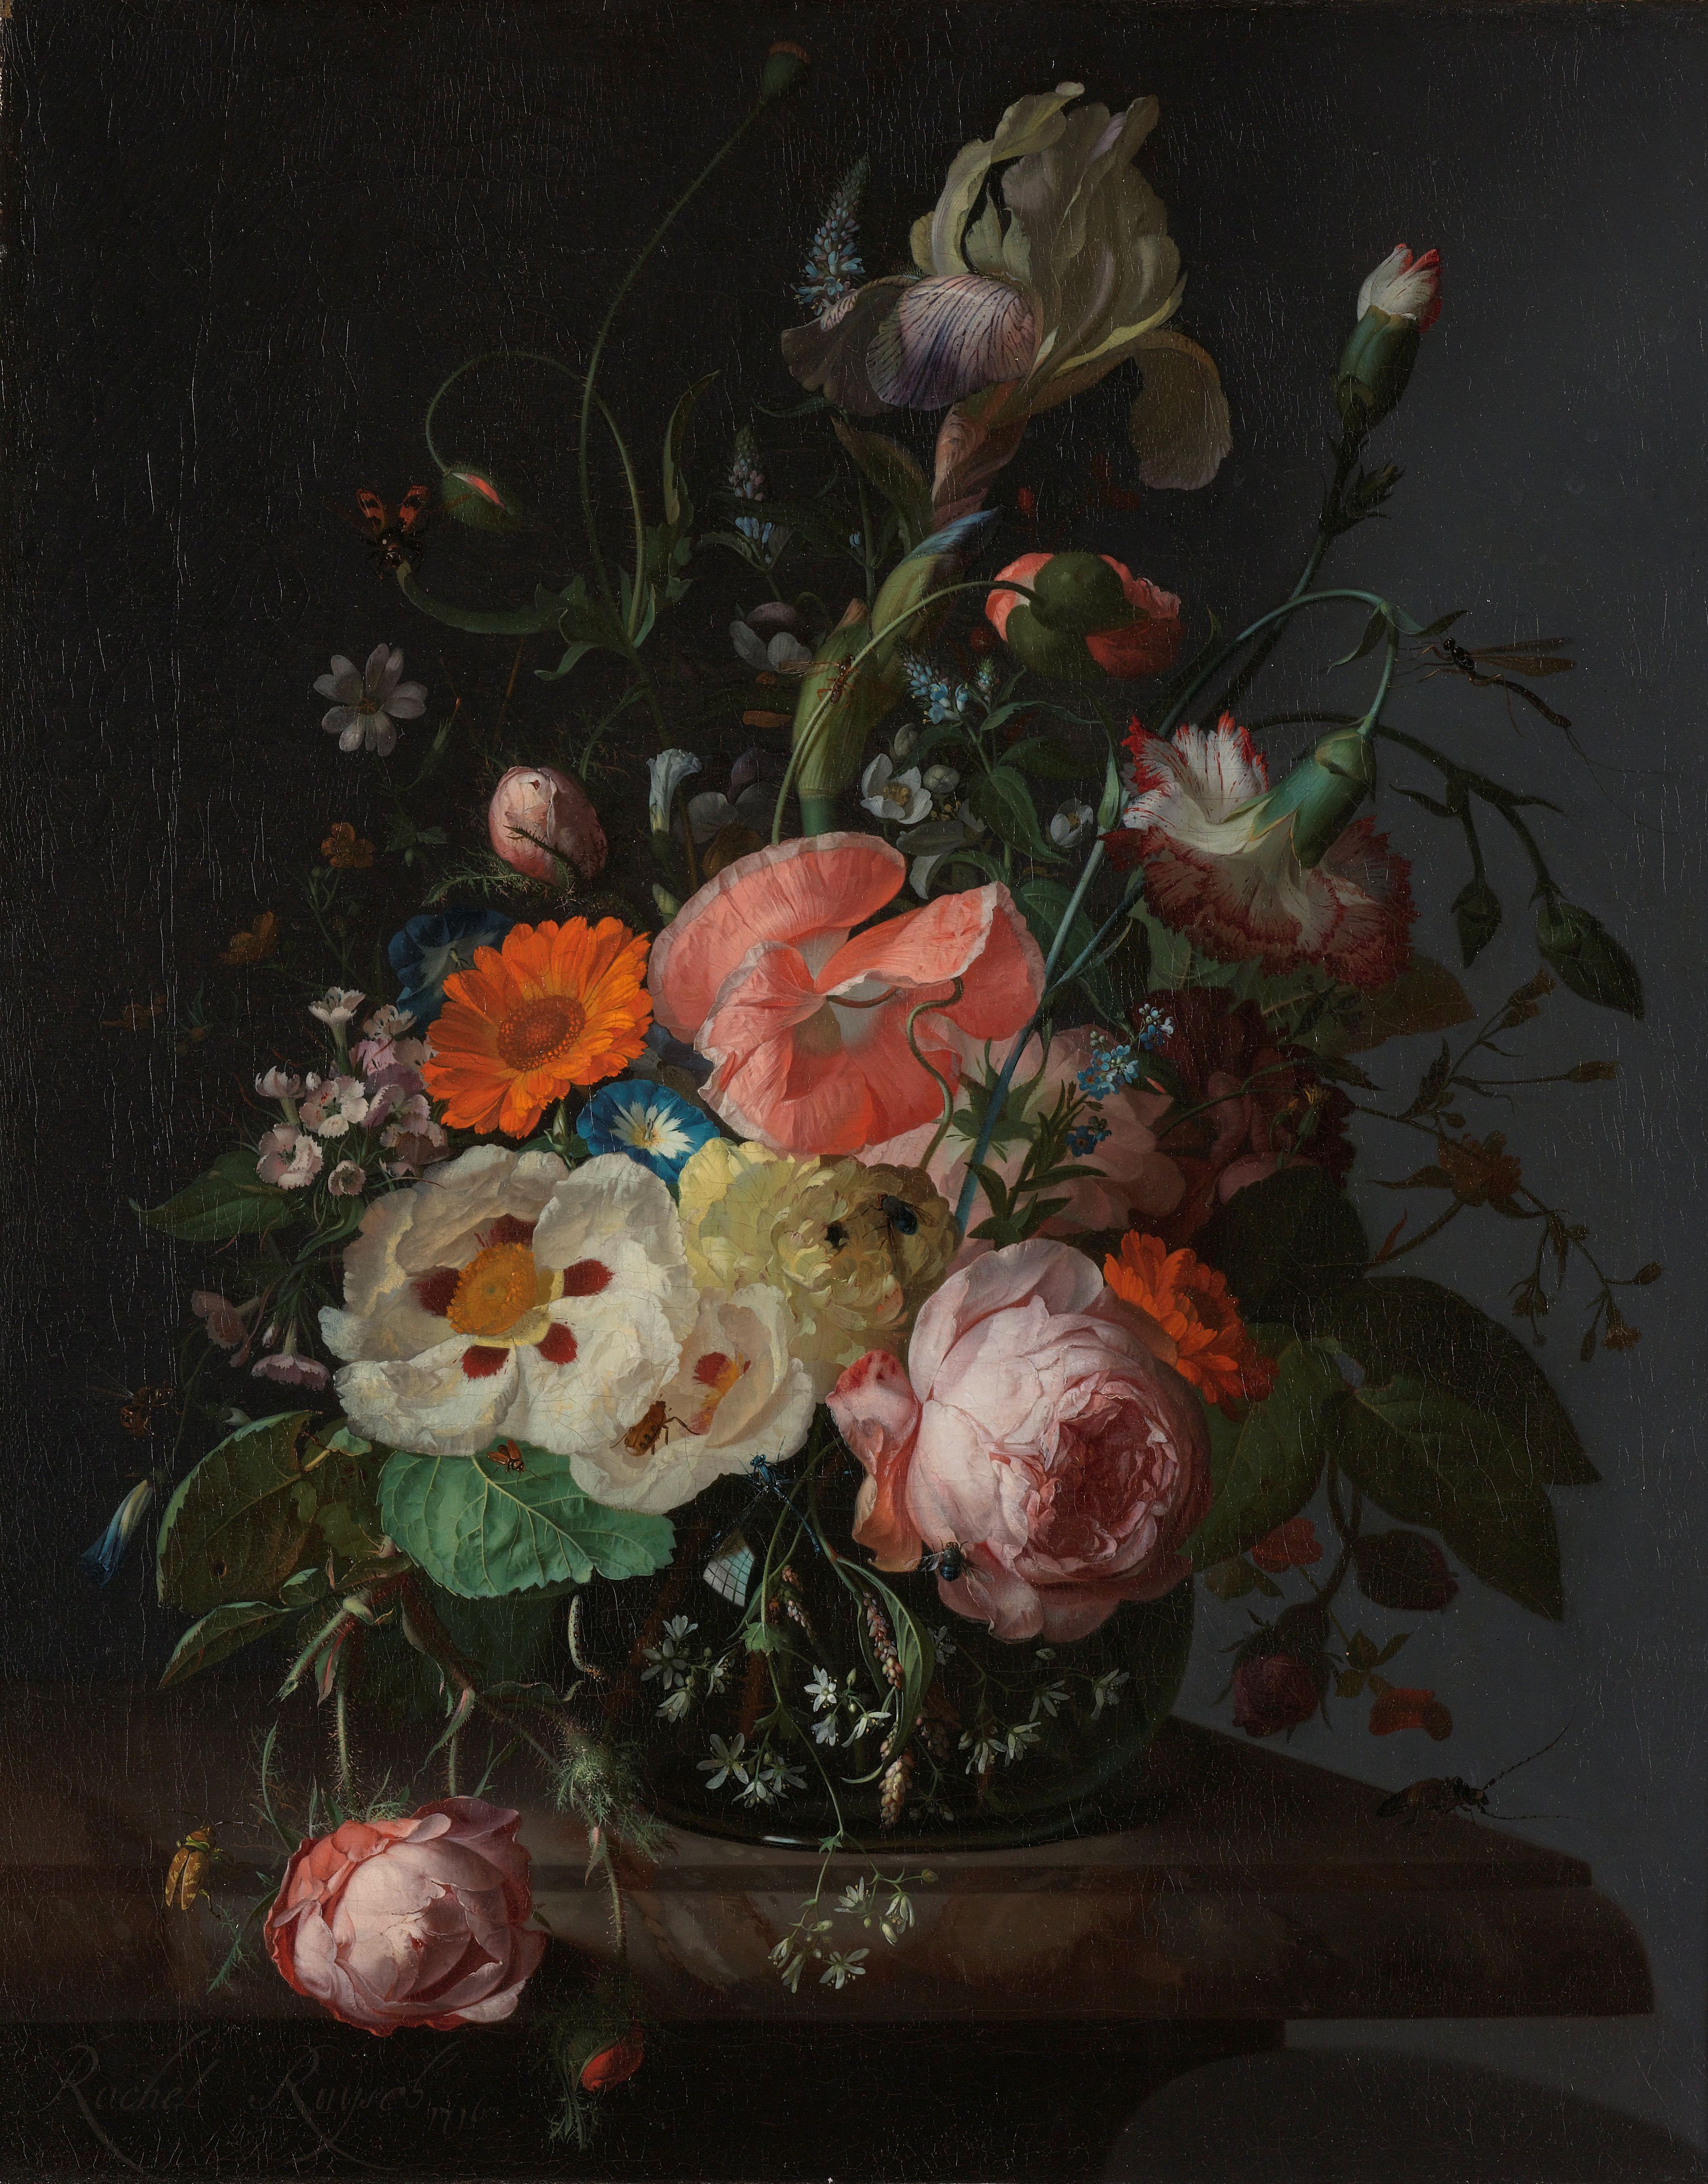 A floral still life, with the arrangement placed on a marble table or ledge. The colors are bright and varied, with the flowers spilling out of the vase and extending beyond the edges of the table. The background is a dark, neutral color that fades to lighter gray on the right edge of the canvas.